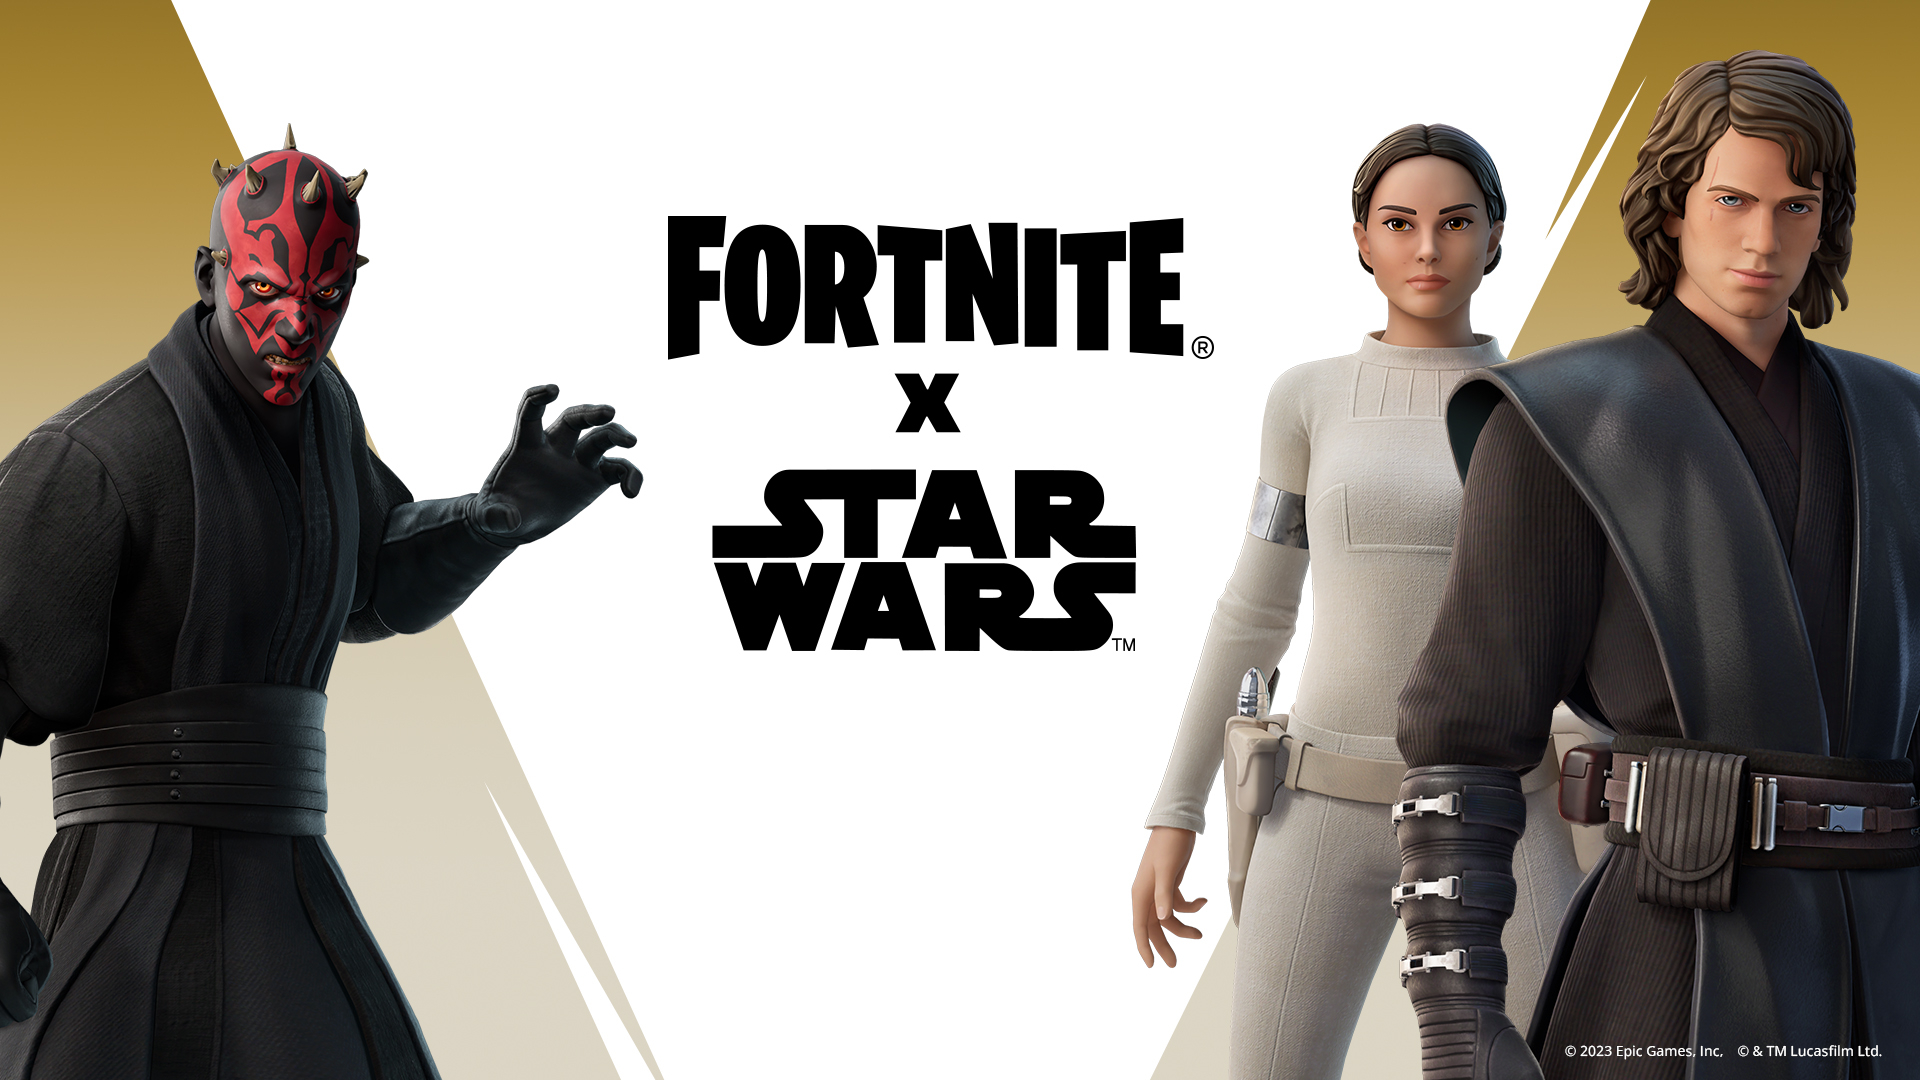 Celebrate STAR WARS™ with The Epic Games Store and Fortnite